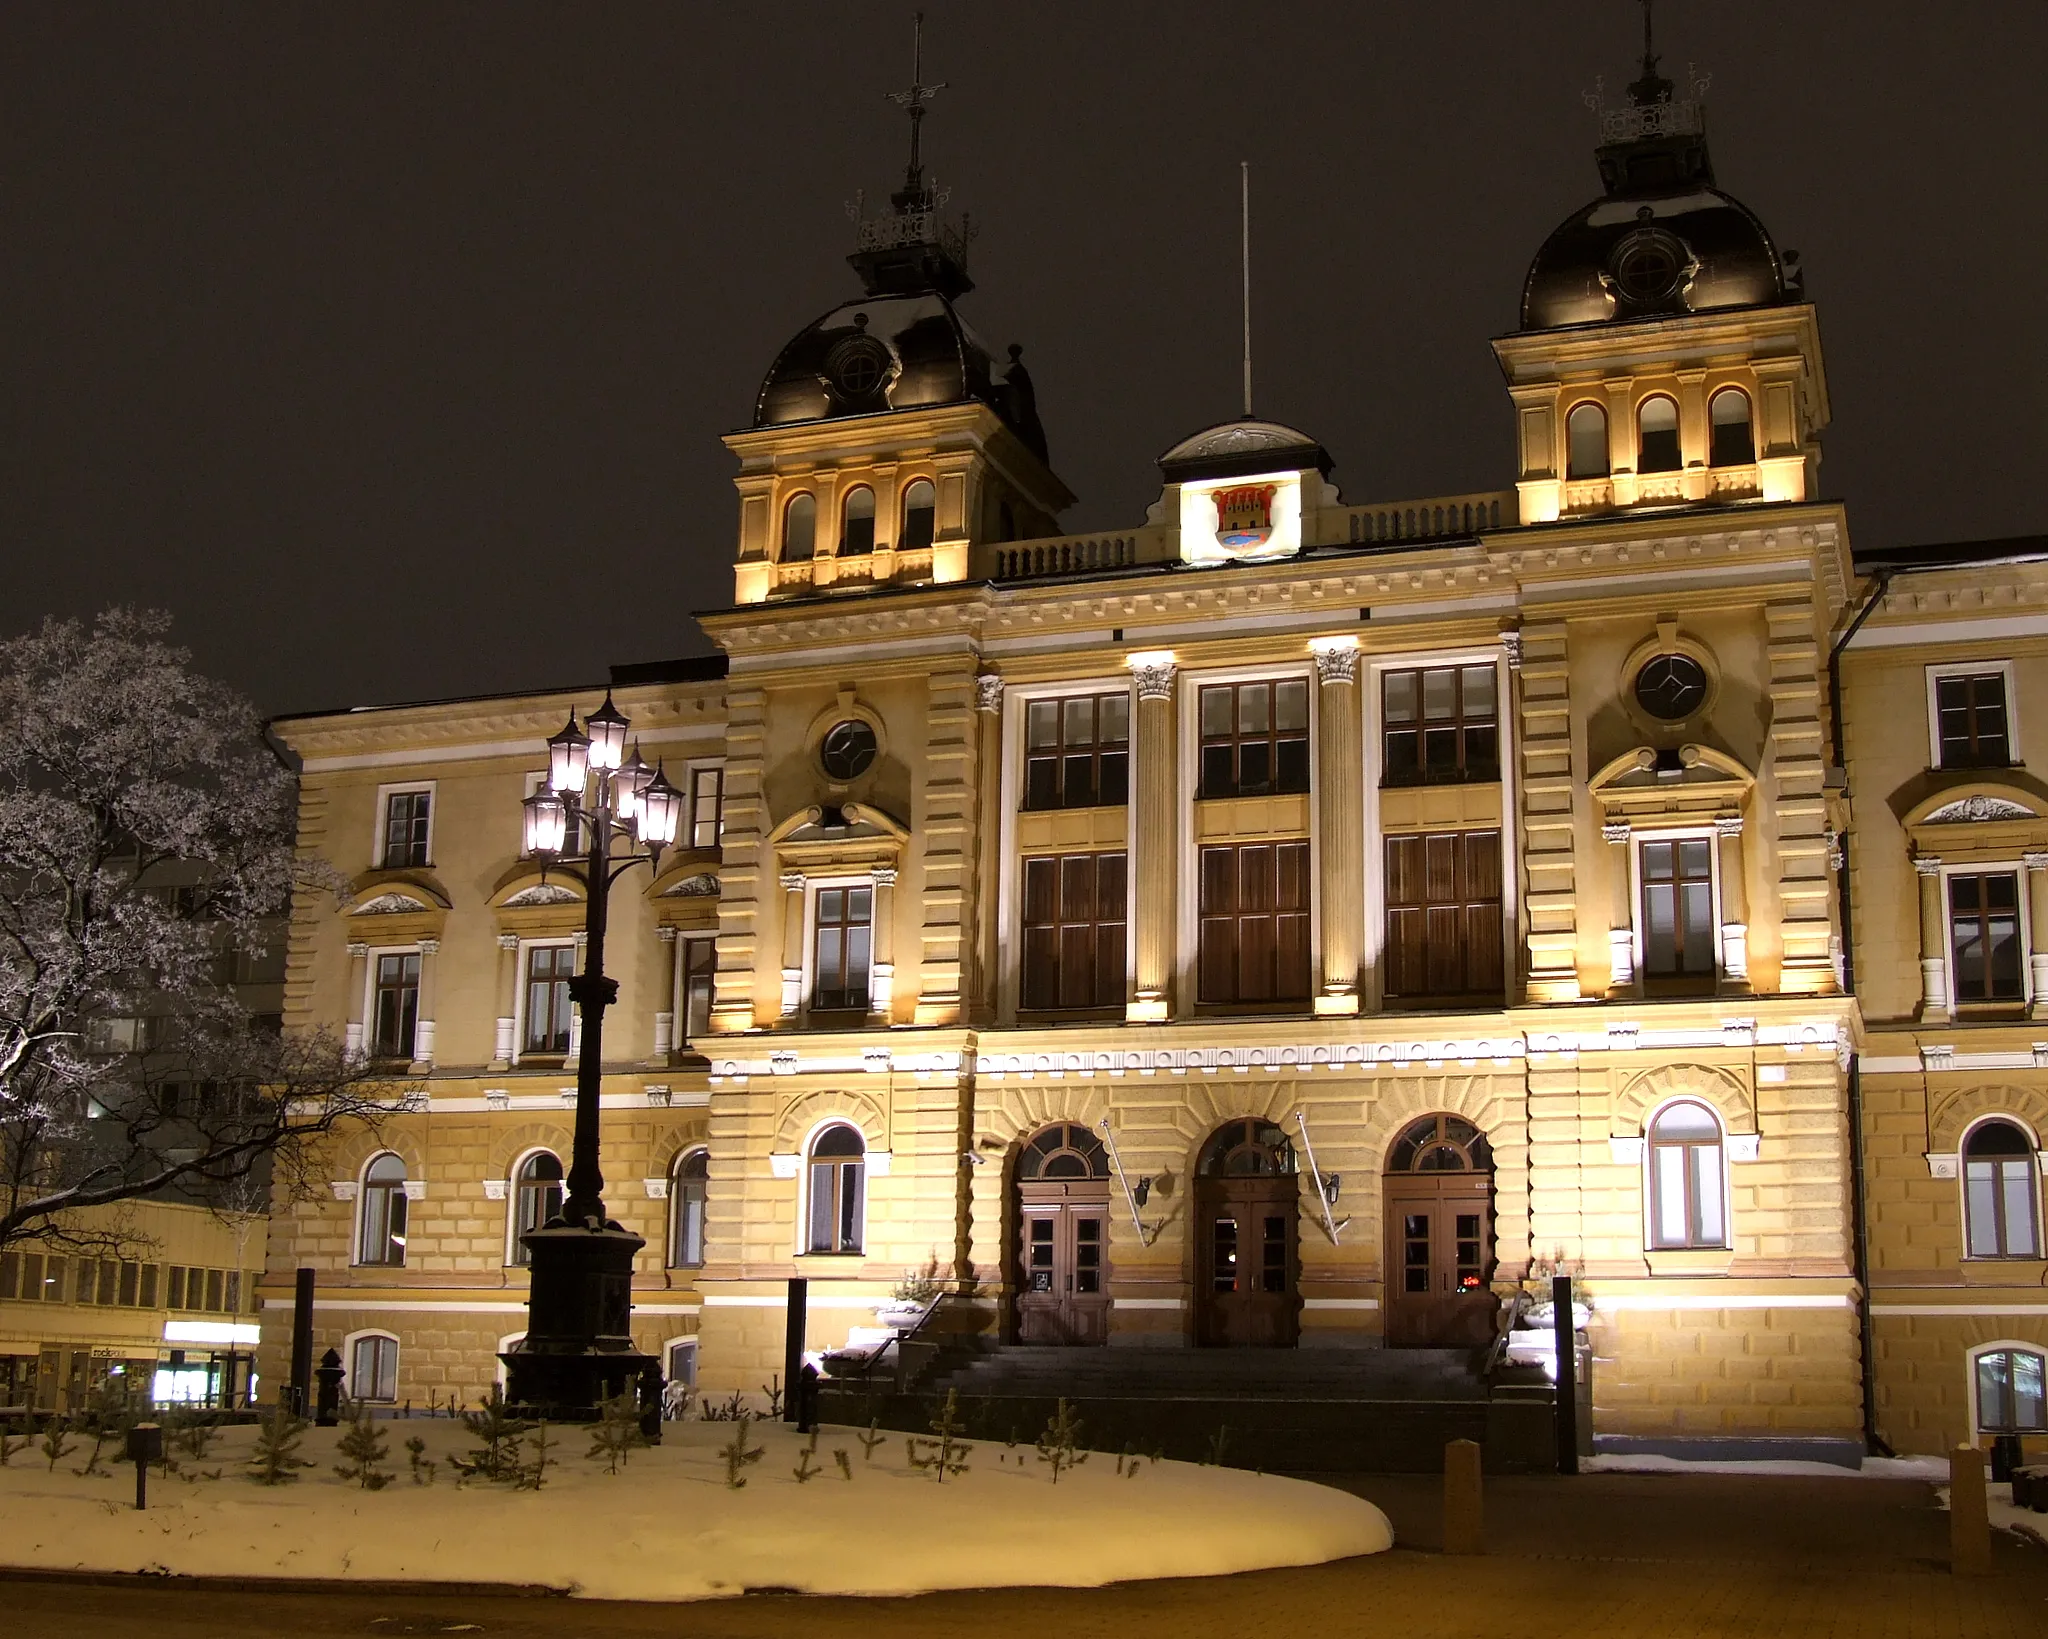 Photo showing: The Oulu City Hall in Oulu, Finland, in the evening. The City Hall was designed by Swedish architect J. E. Stenberg in 1885, and it was completed in 1886.